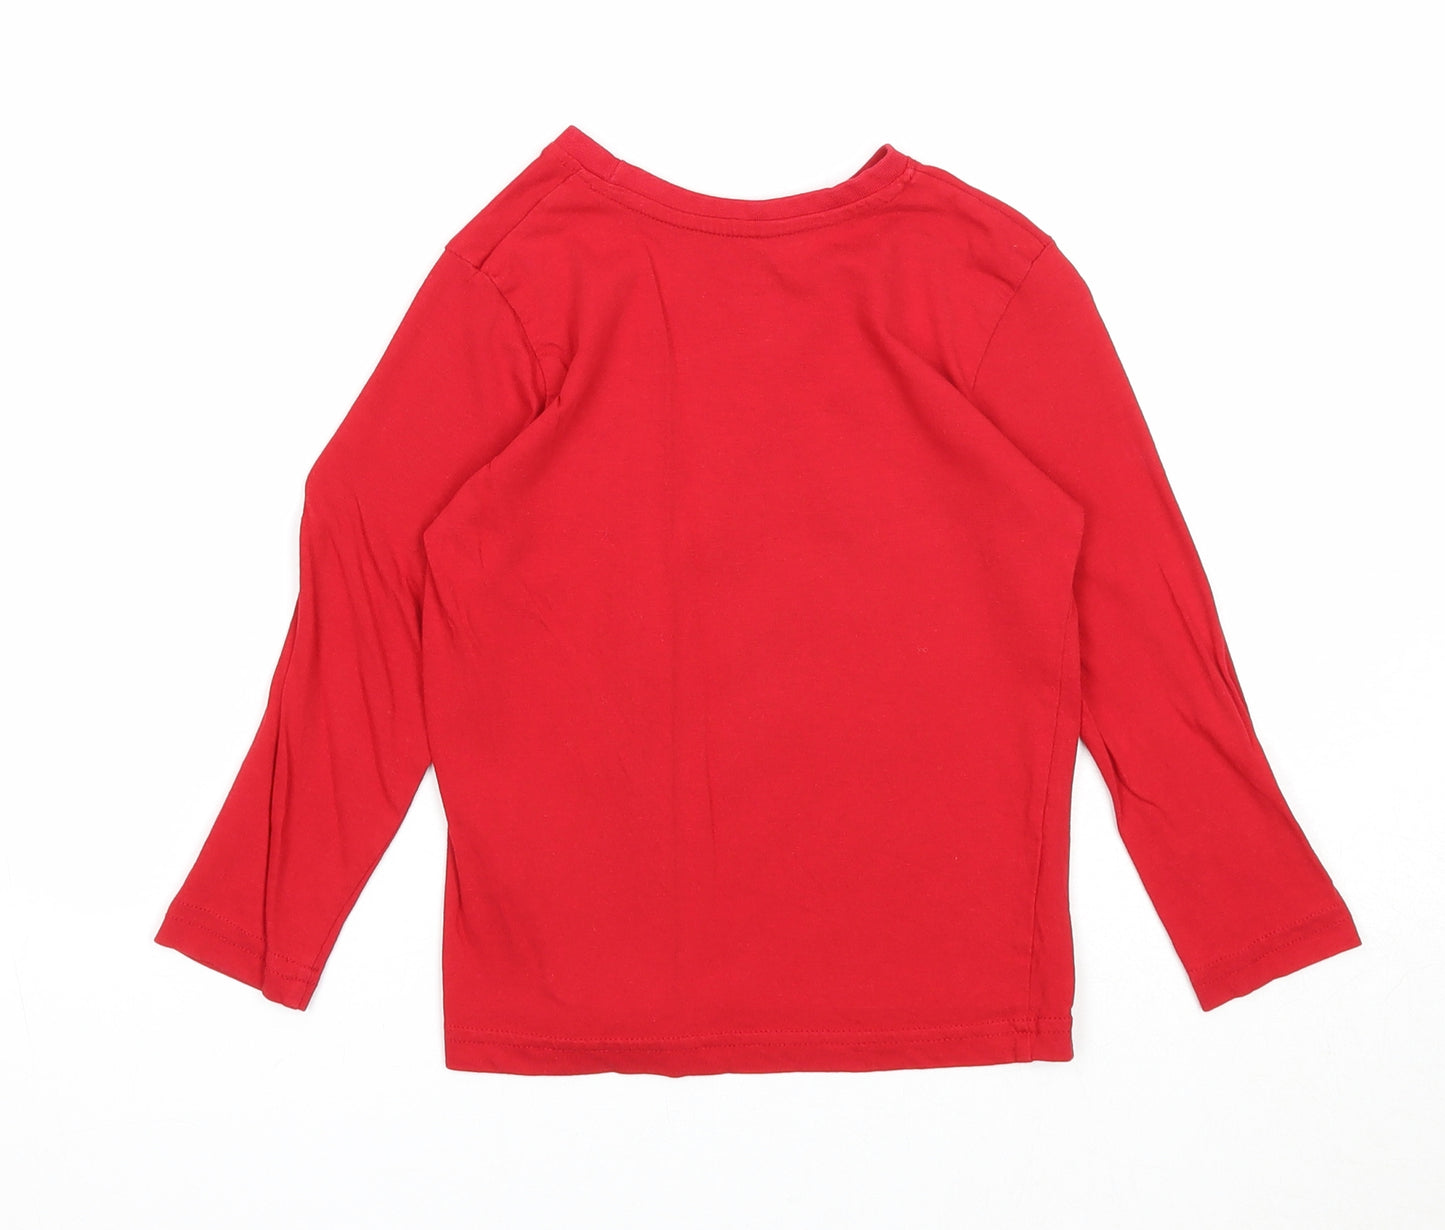 Primark Girls Red Cotton Basic T-Shirt Size 3-4 Years Round Neck Pullover - Reindeer Christmas